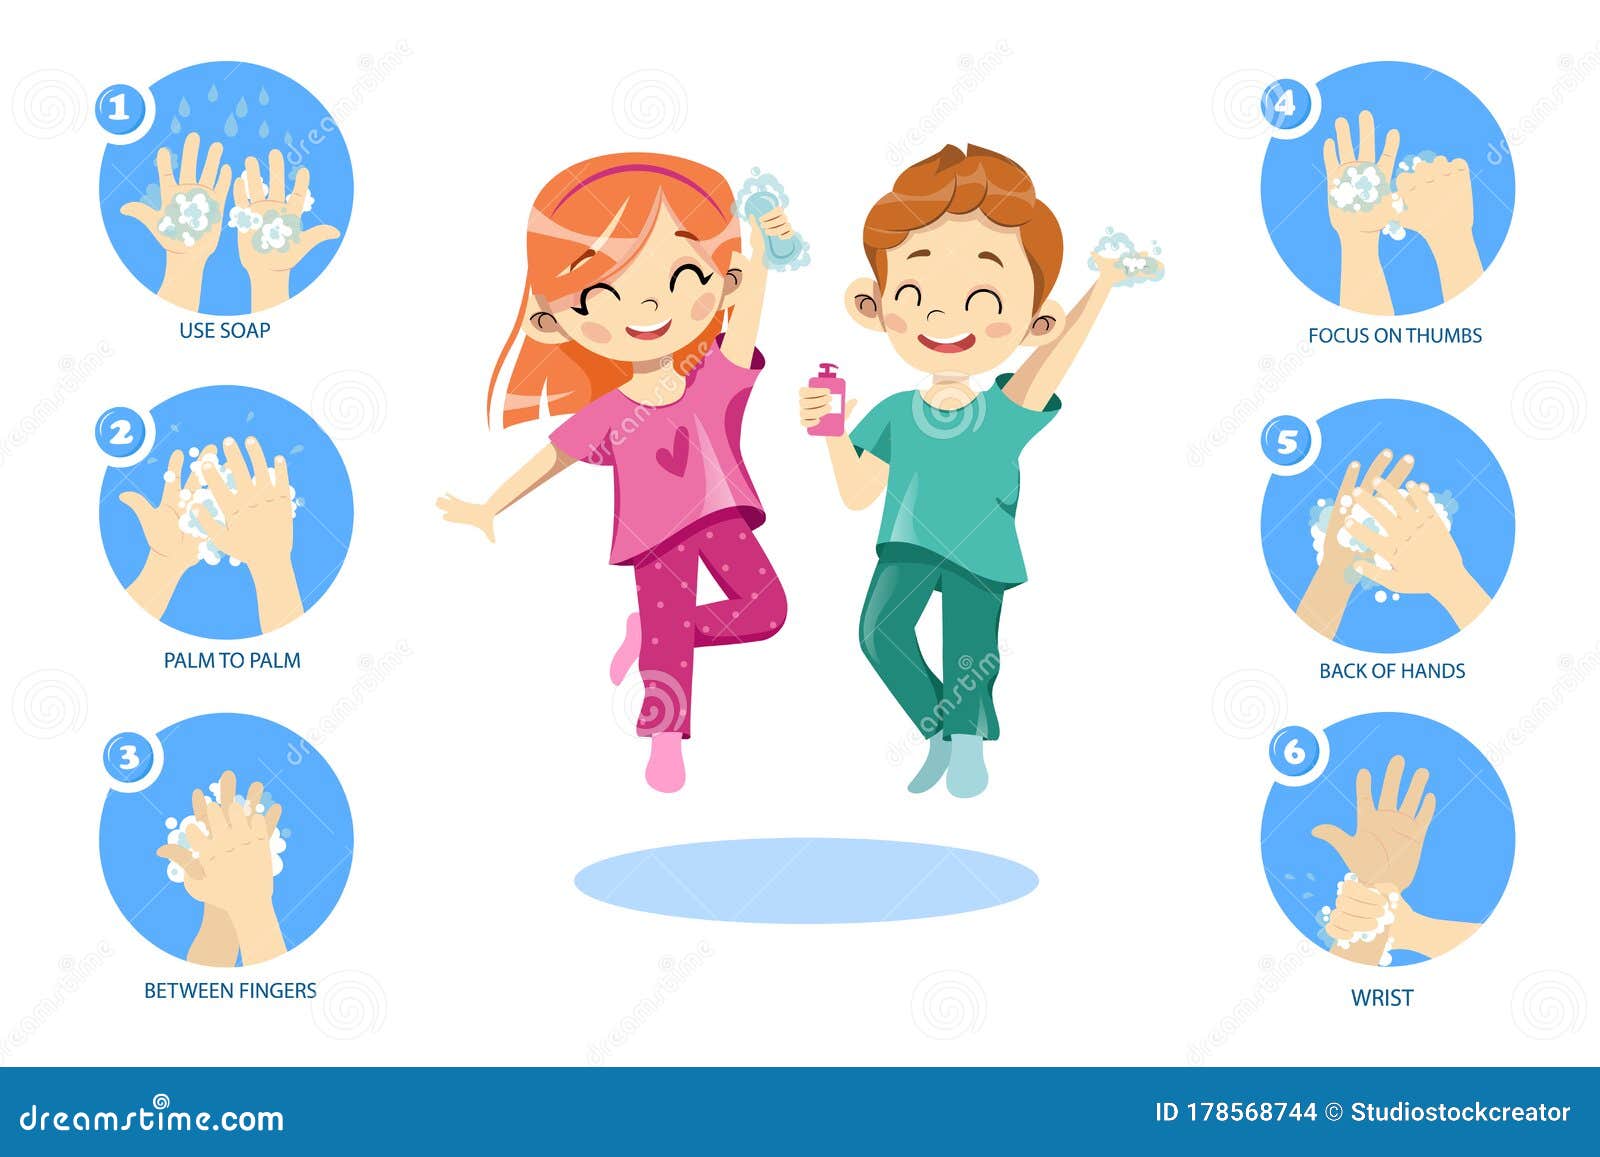 concept of kids personal hygiene. infographic icons with rules showing how to wash hands properly. happy children boy